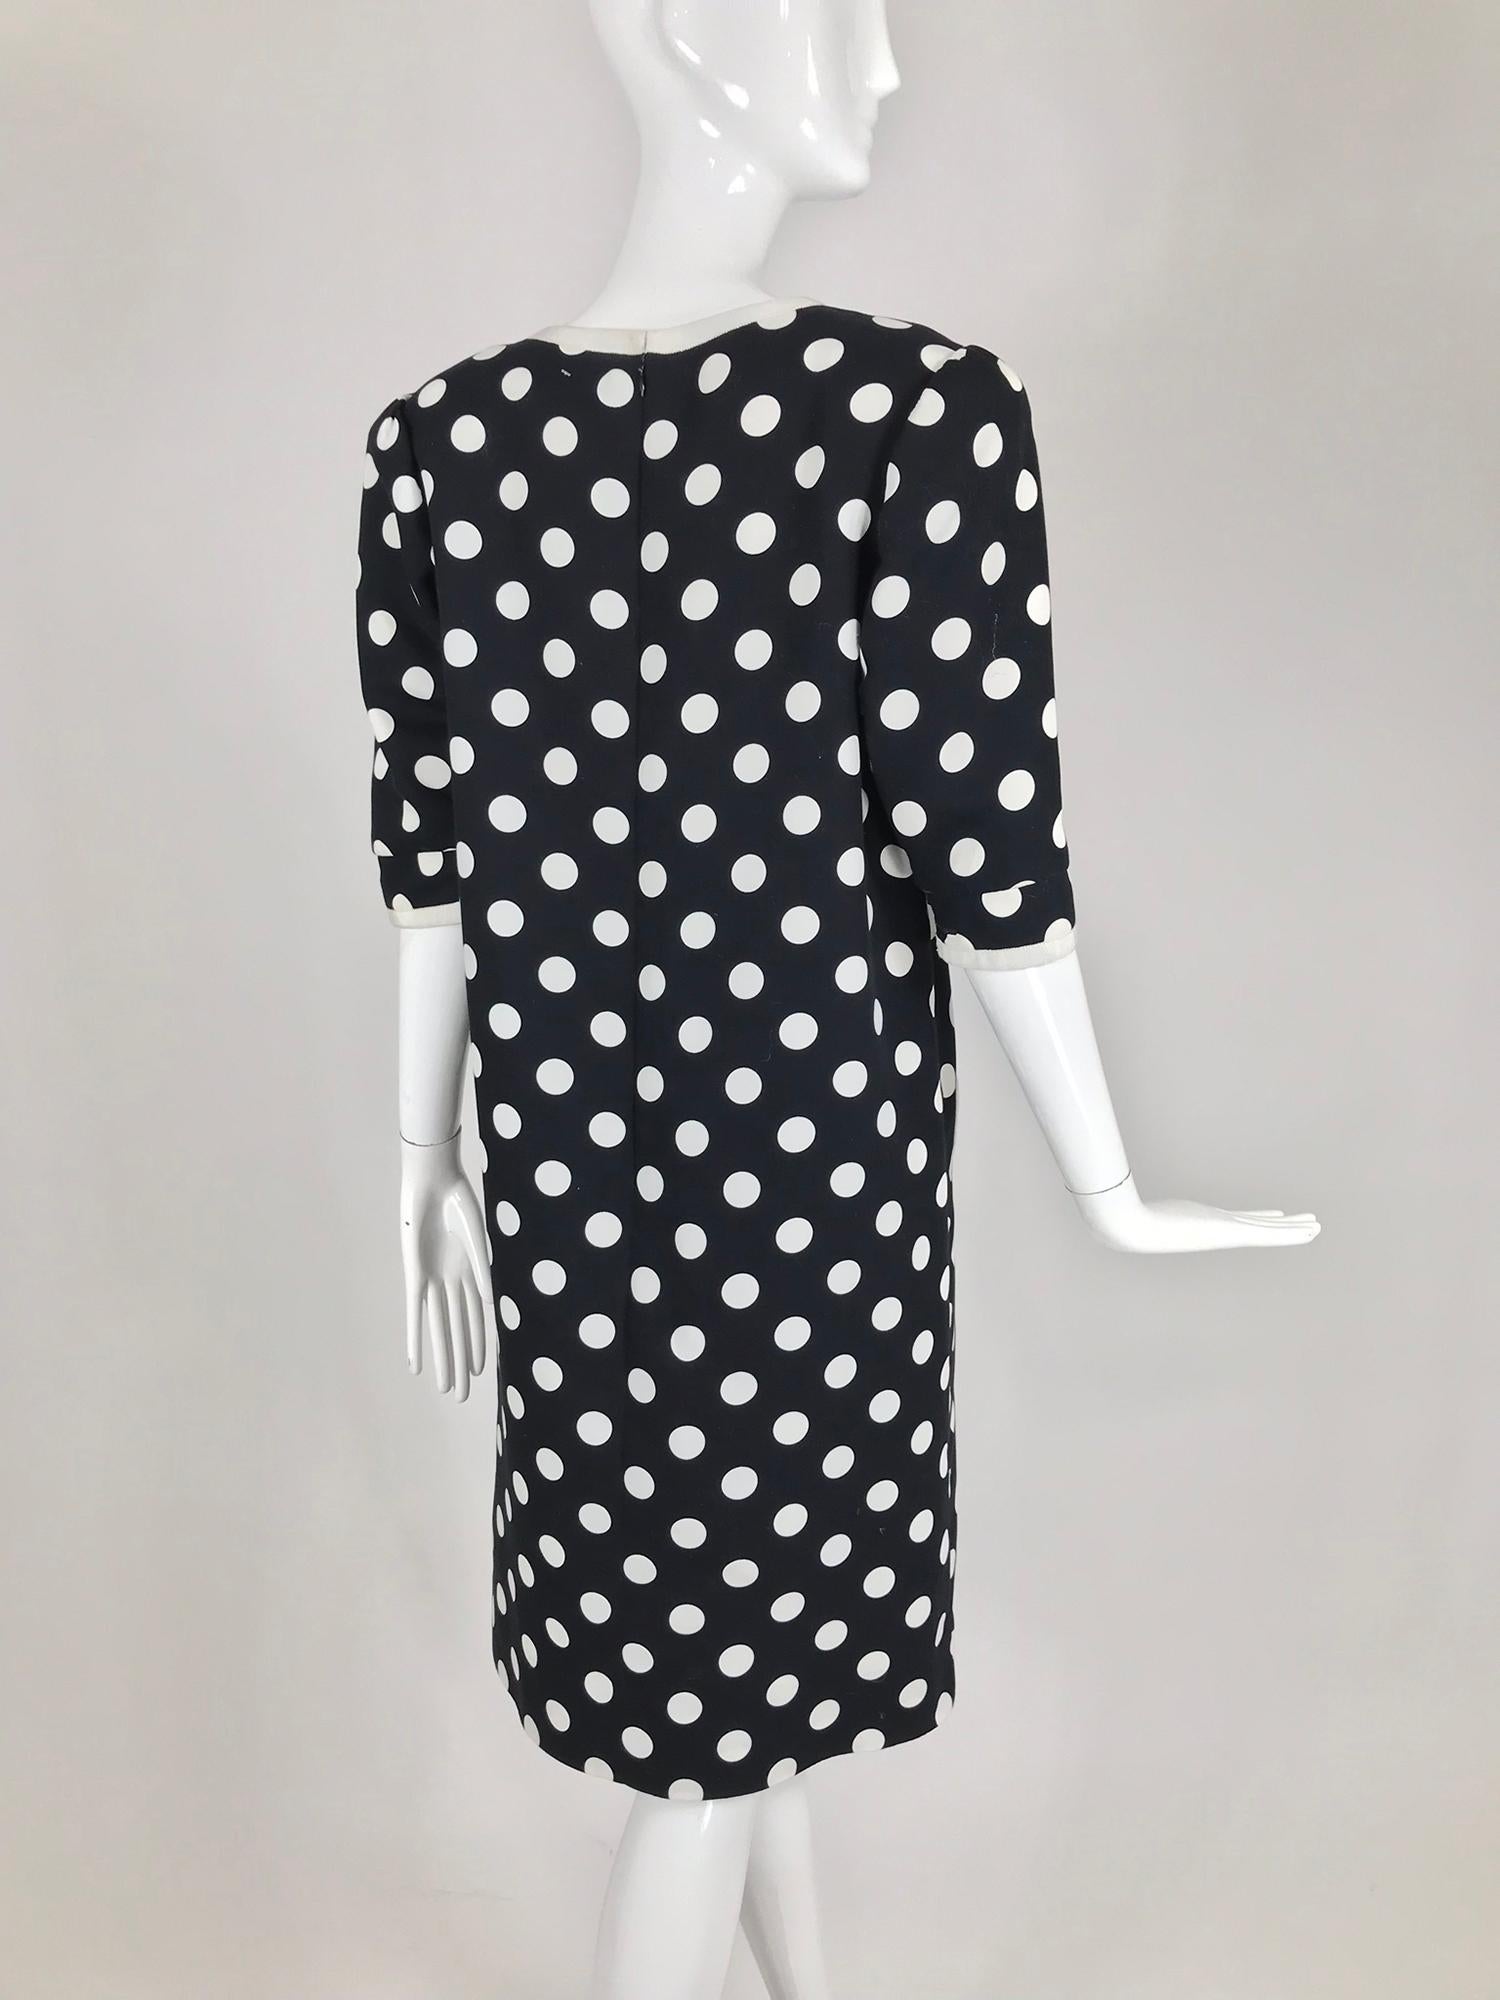 Givenchy Couture Black and White Cotton Polka Dot Day Dress 1980s For Sale 3